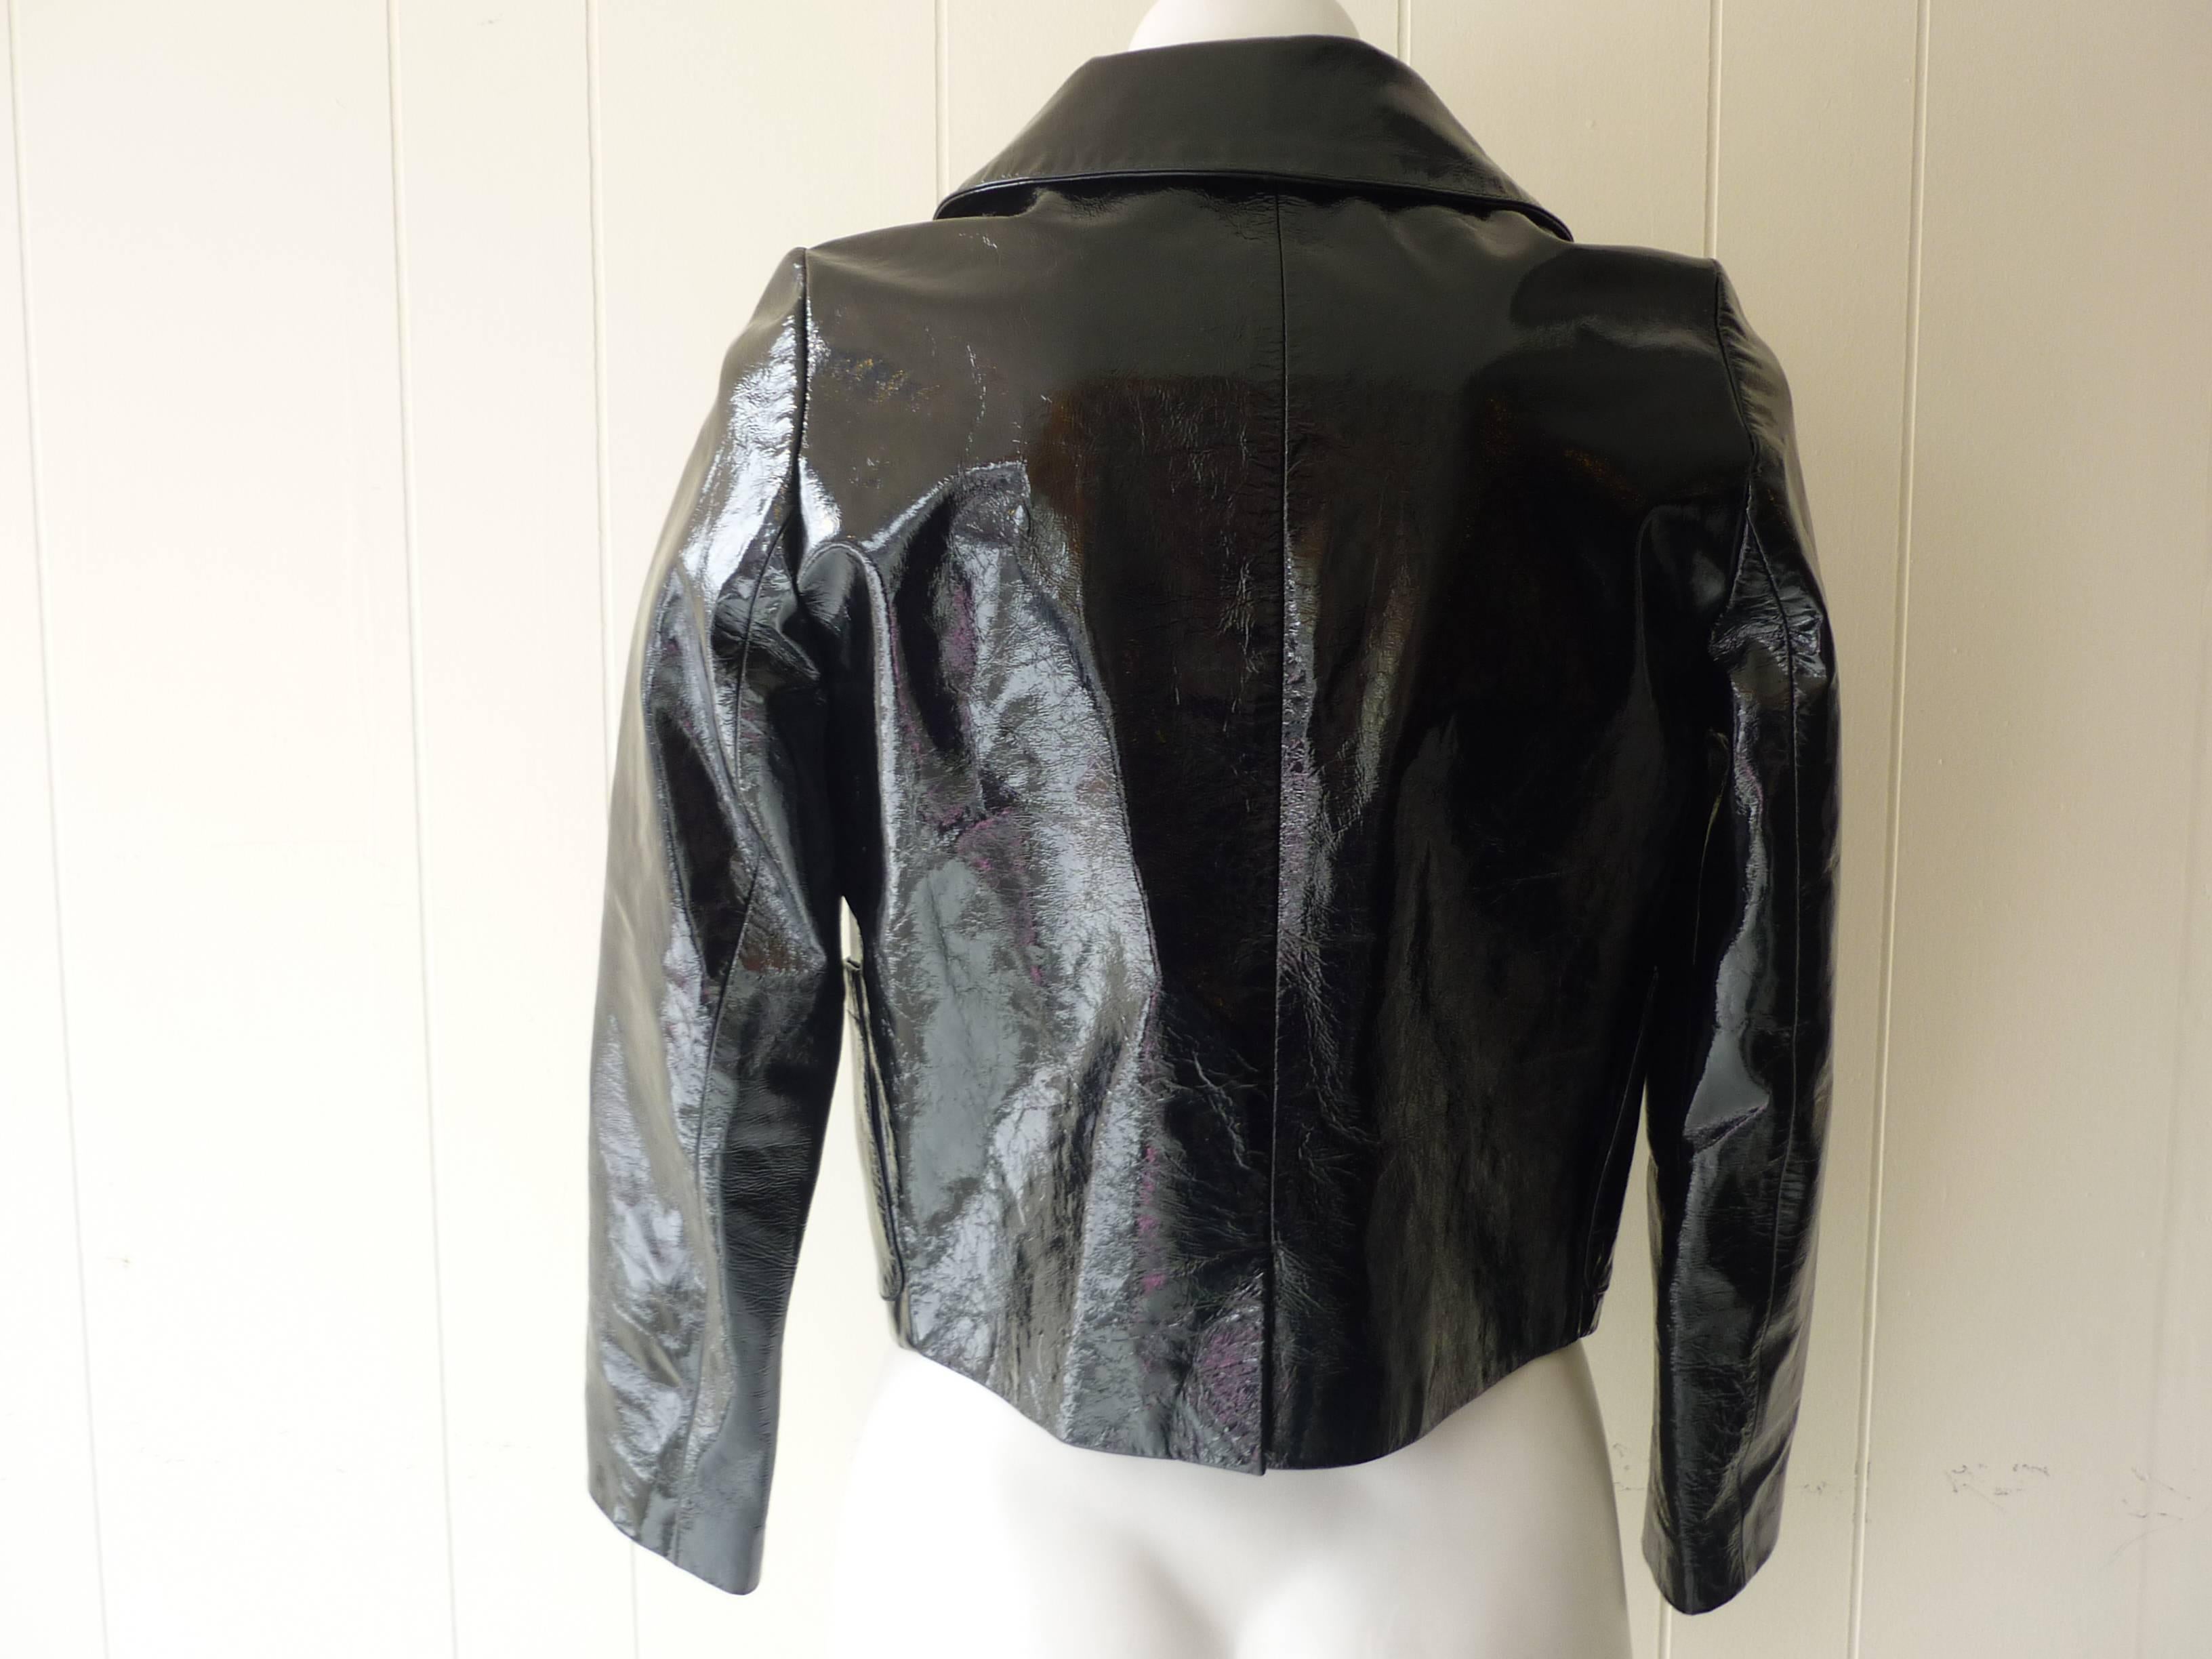 Very nice cropped jacket in as new condition. The jacket has slit pockets at the sides; double covered button closure at the front, and a small slit in the middle back.